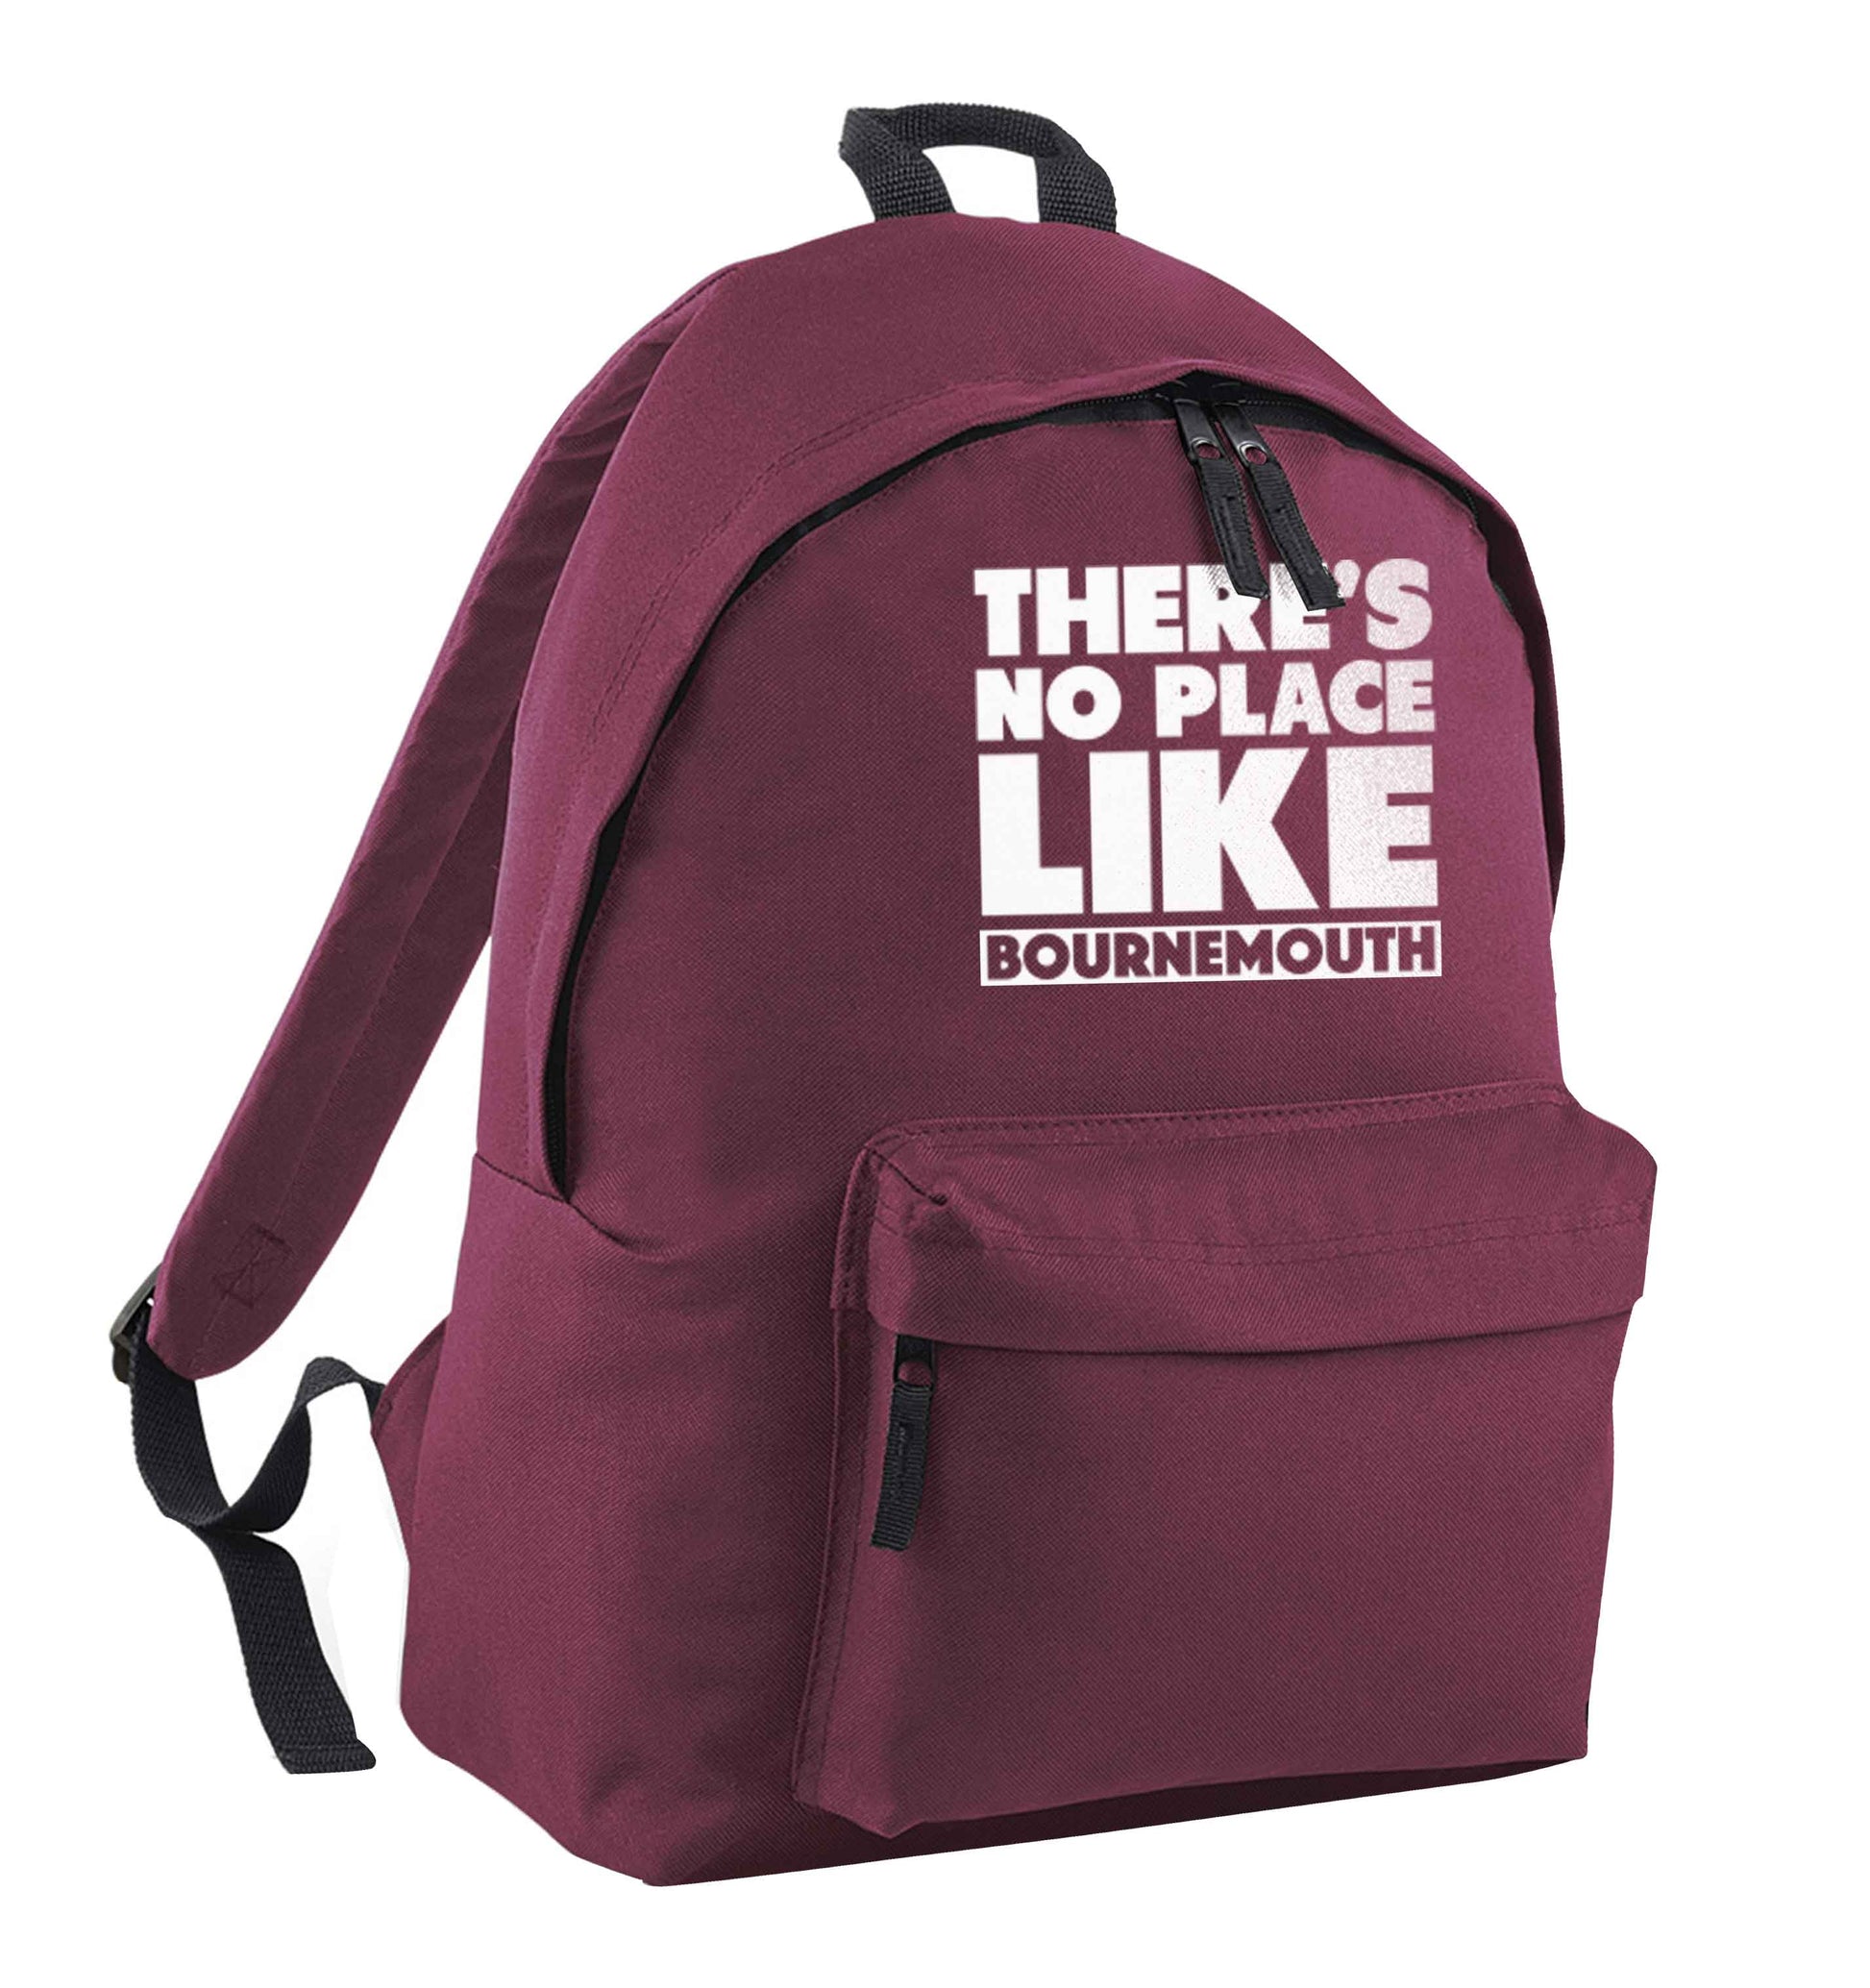 There's no place like Bournemouth maroon adults backpack